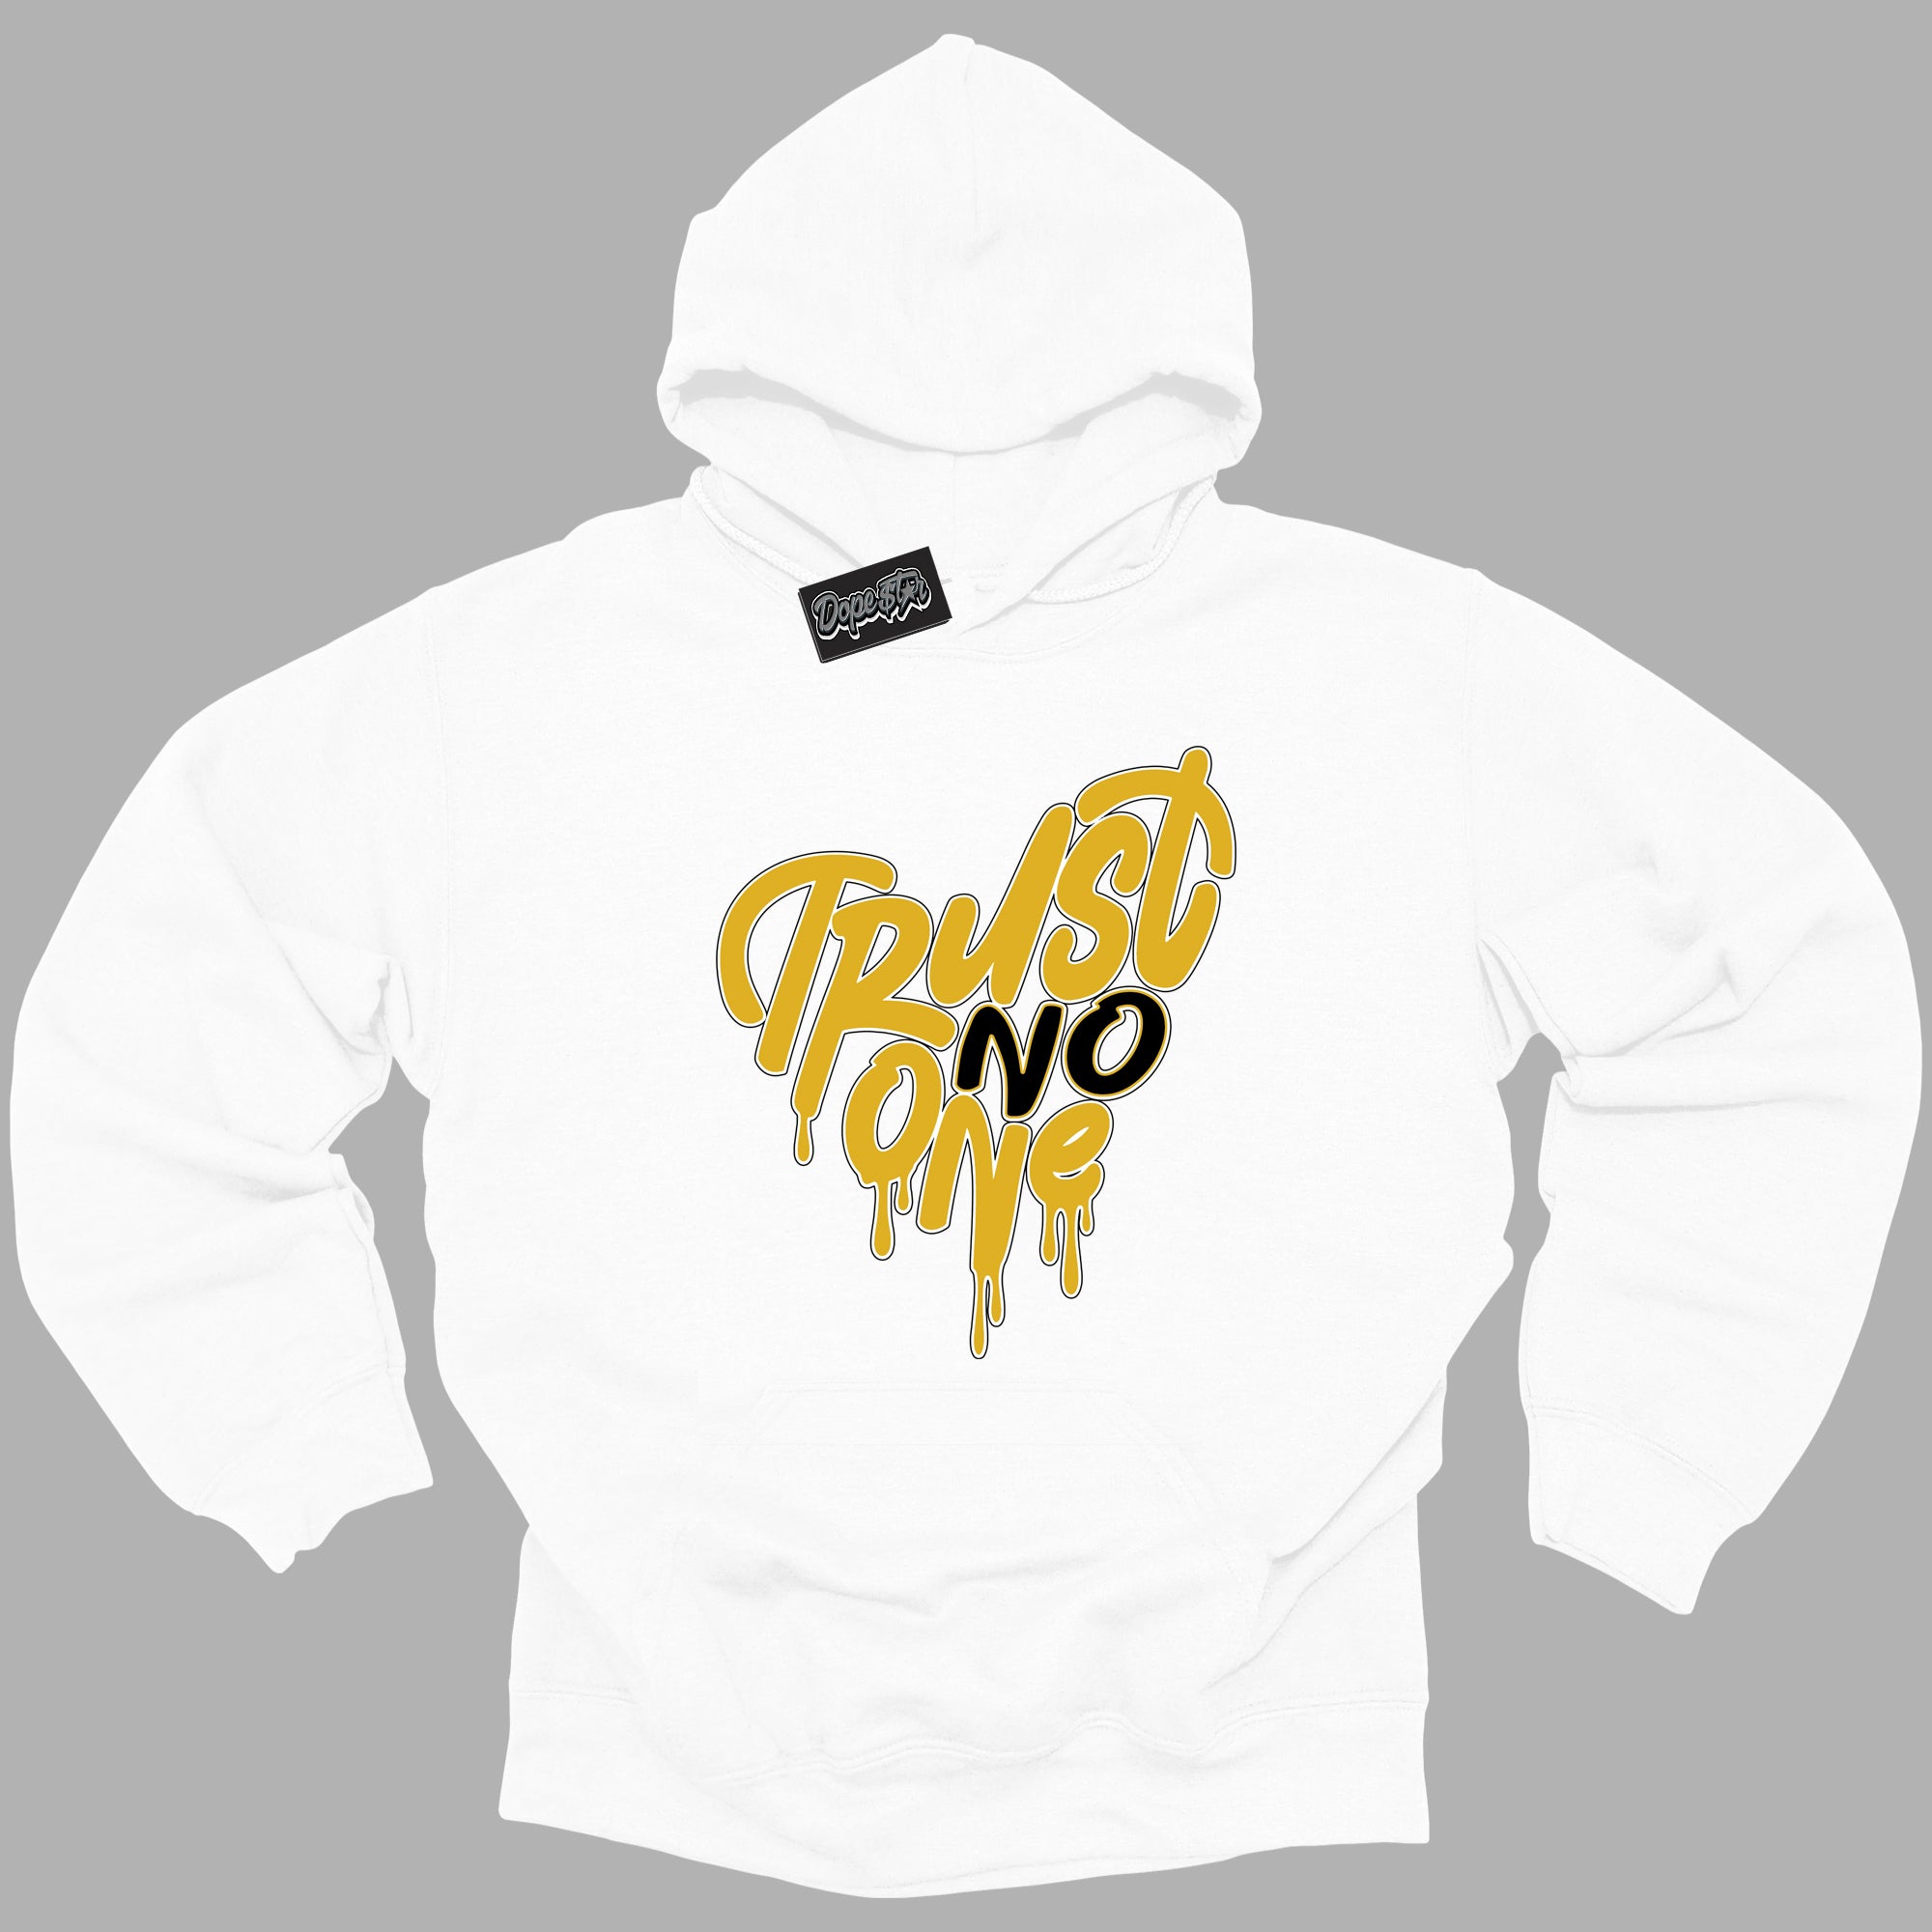 Cool White Hoodie with “ Trust No One Heart ”  design that Perfectly Matches Yellow Ochre 6s Sneakers.